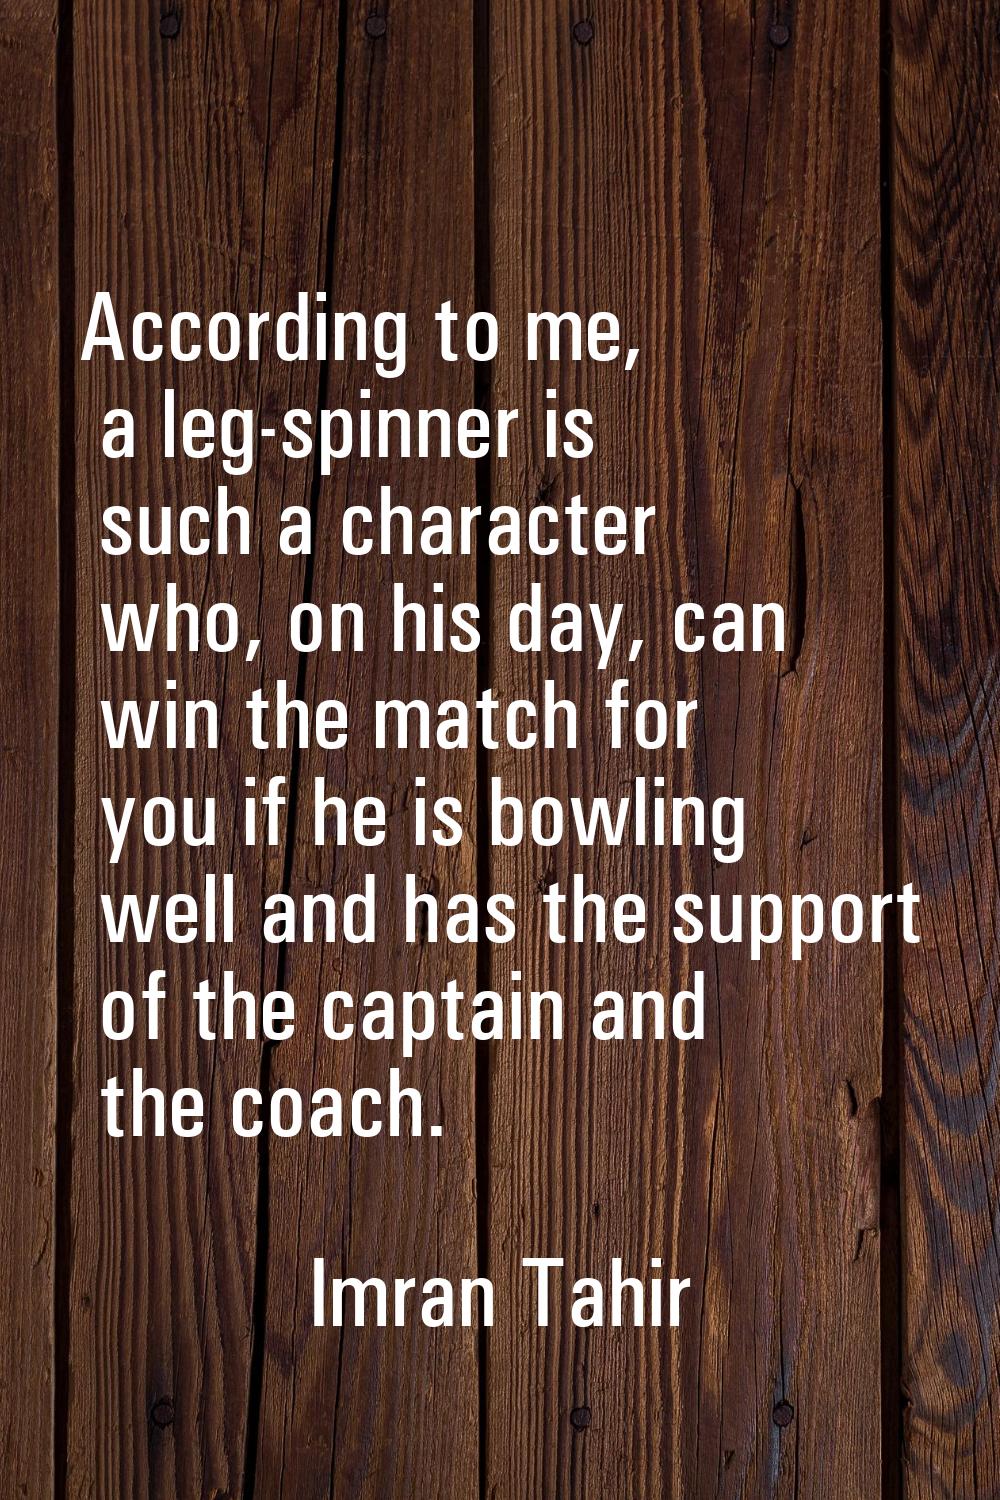 According to me, a leg-spinner is such a character who, on his day, can win the match for you if he